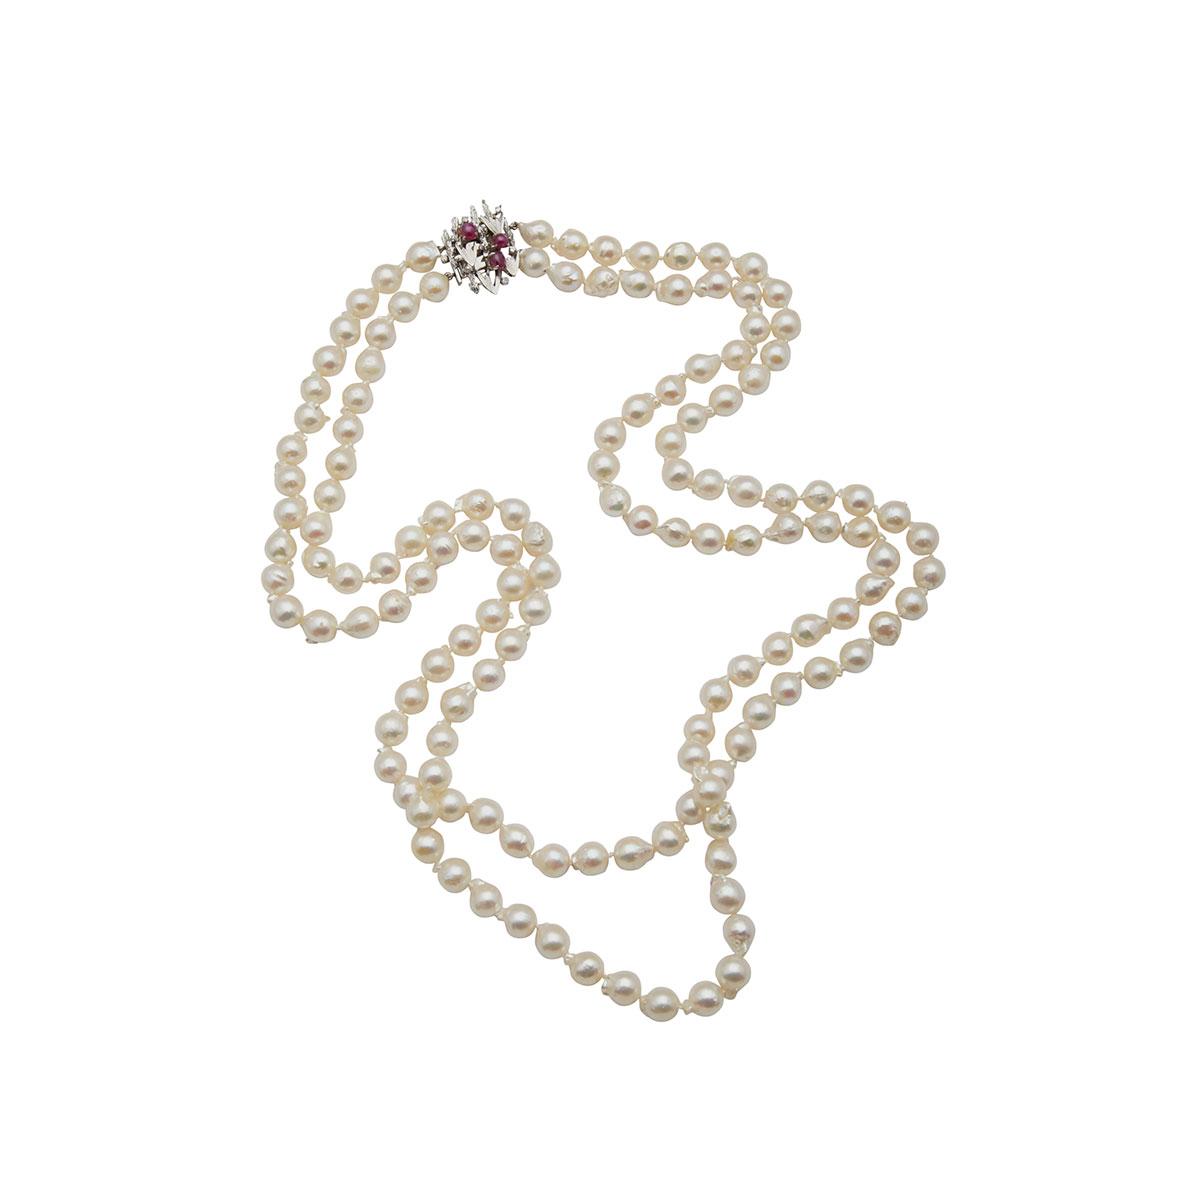 Double Strand Of Cultured Baroque Pearls